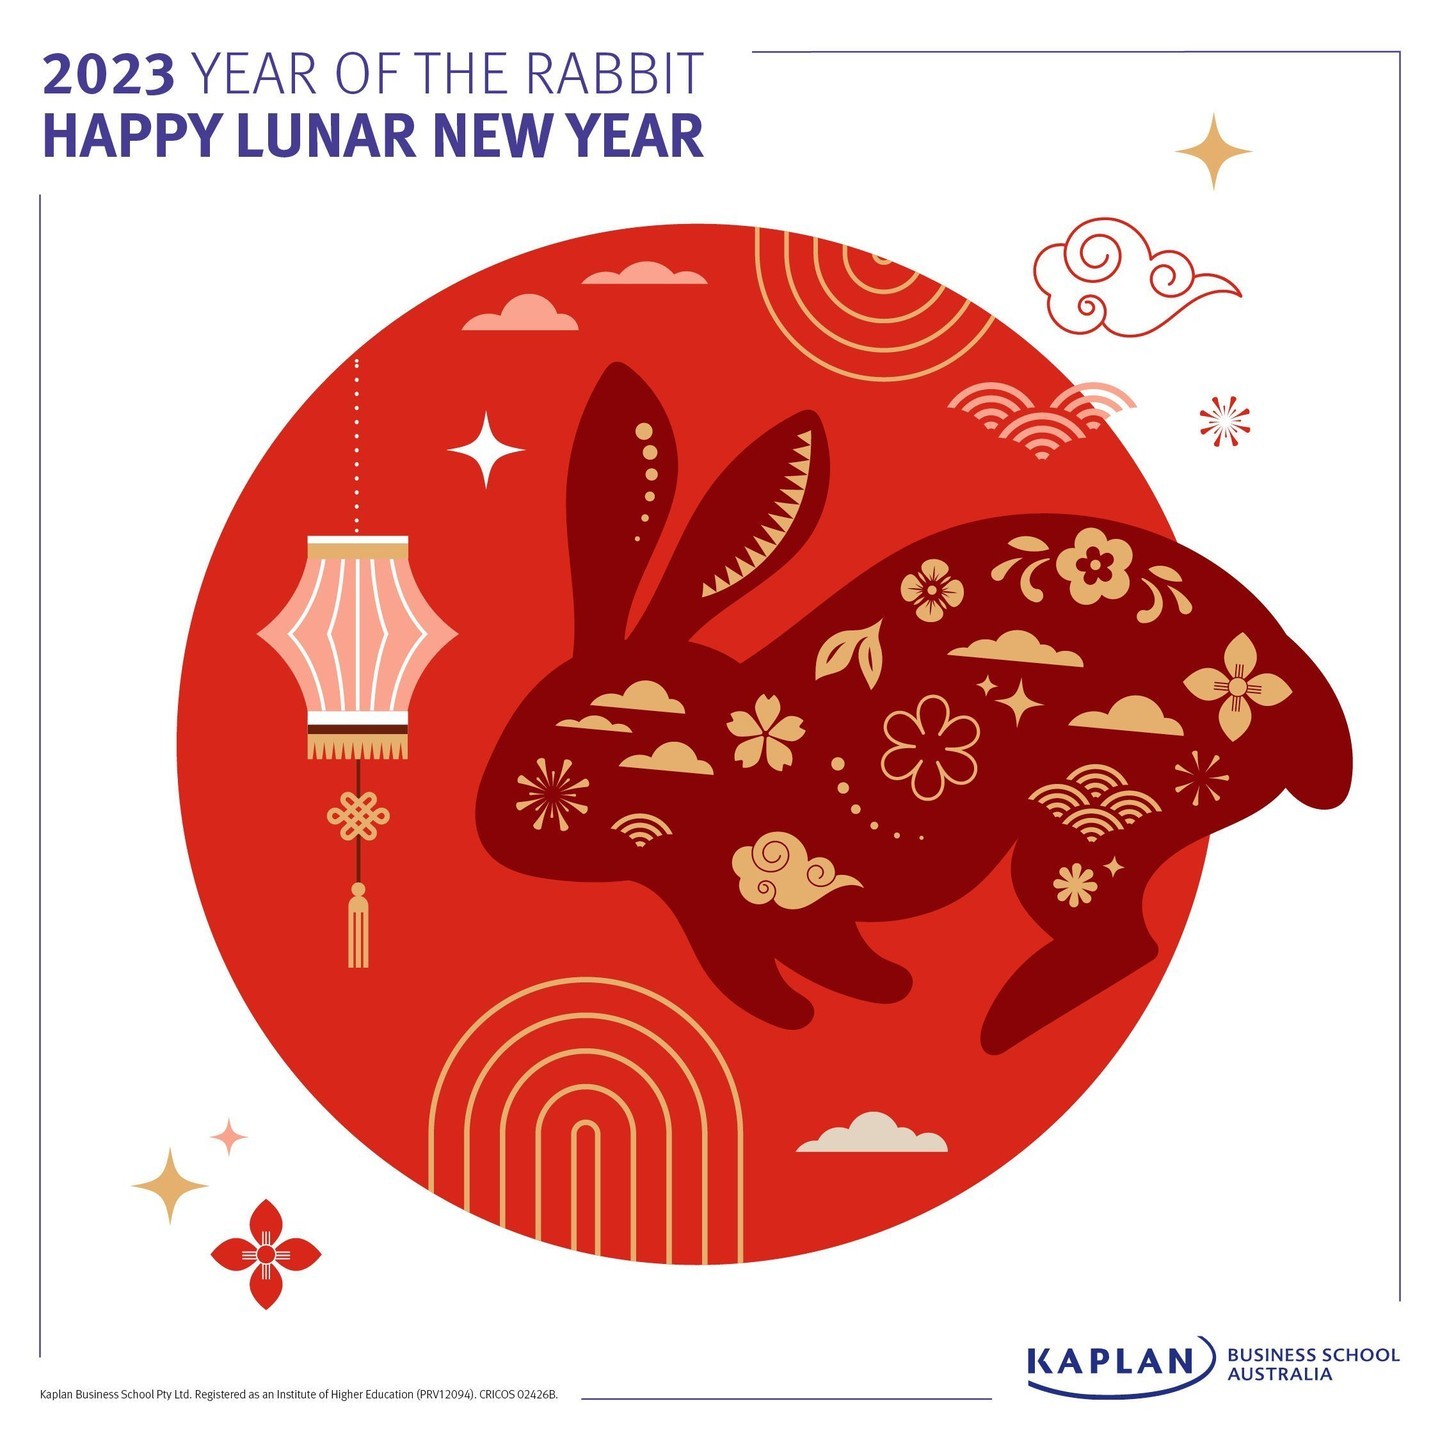 Happy Lunar New Year from @studykbs !

We thank you for your valued partnership this year and wish you strength and vitality in the year of the Rabbit.

#StudyKBS